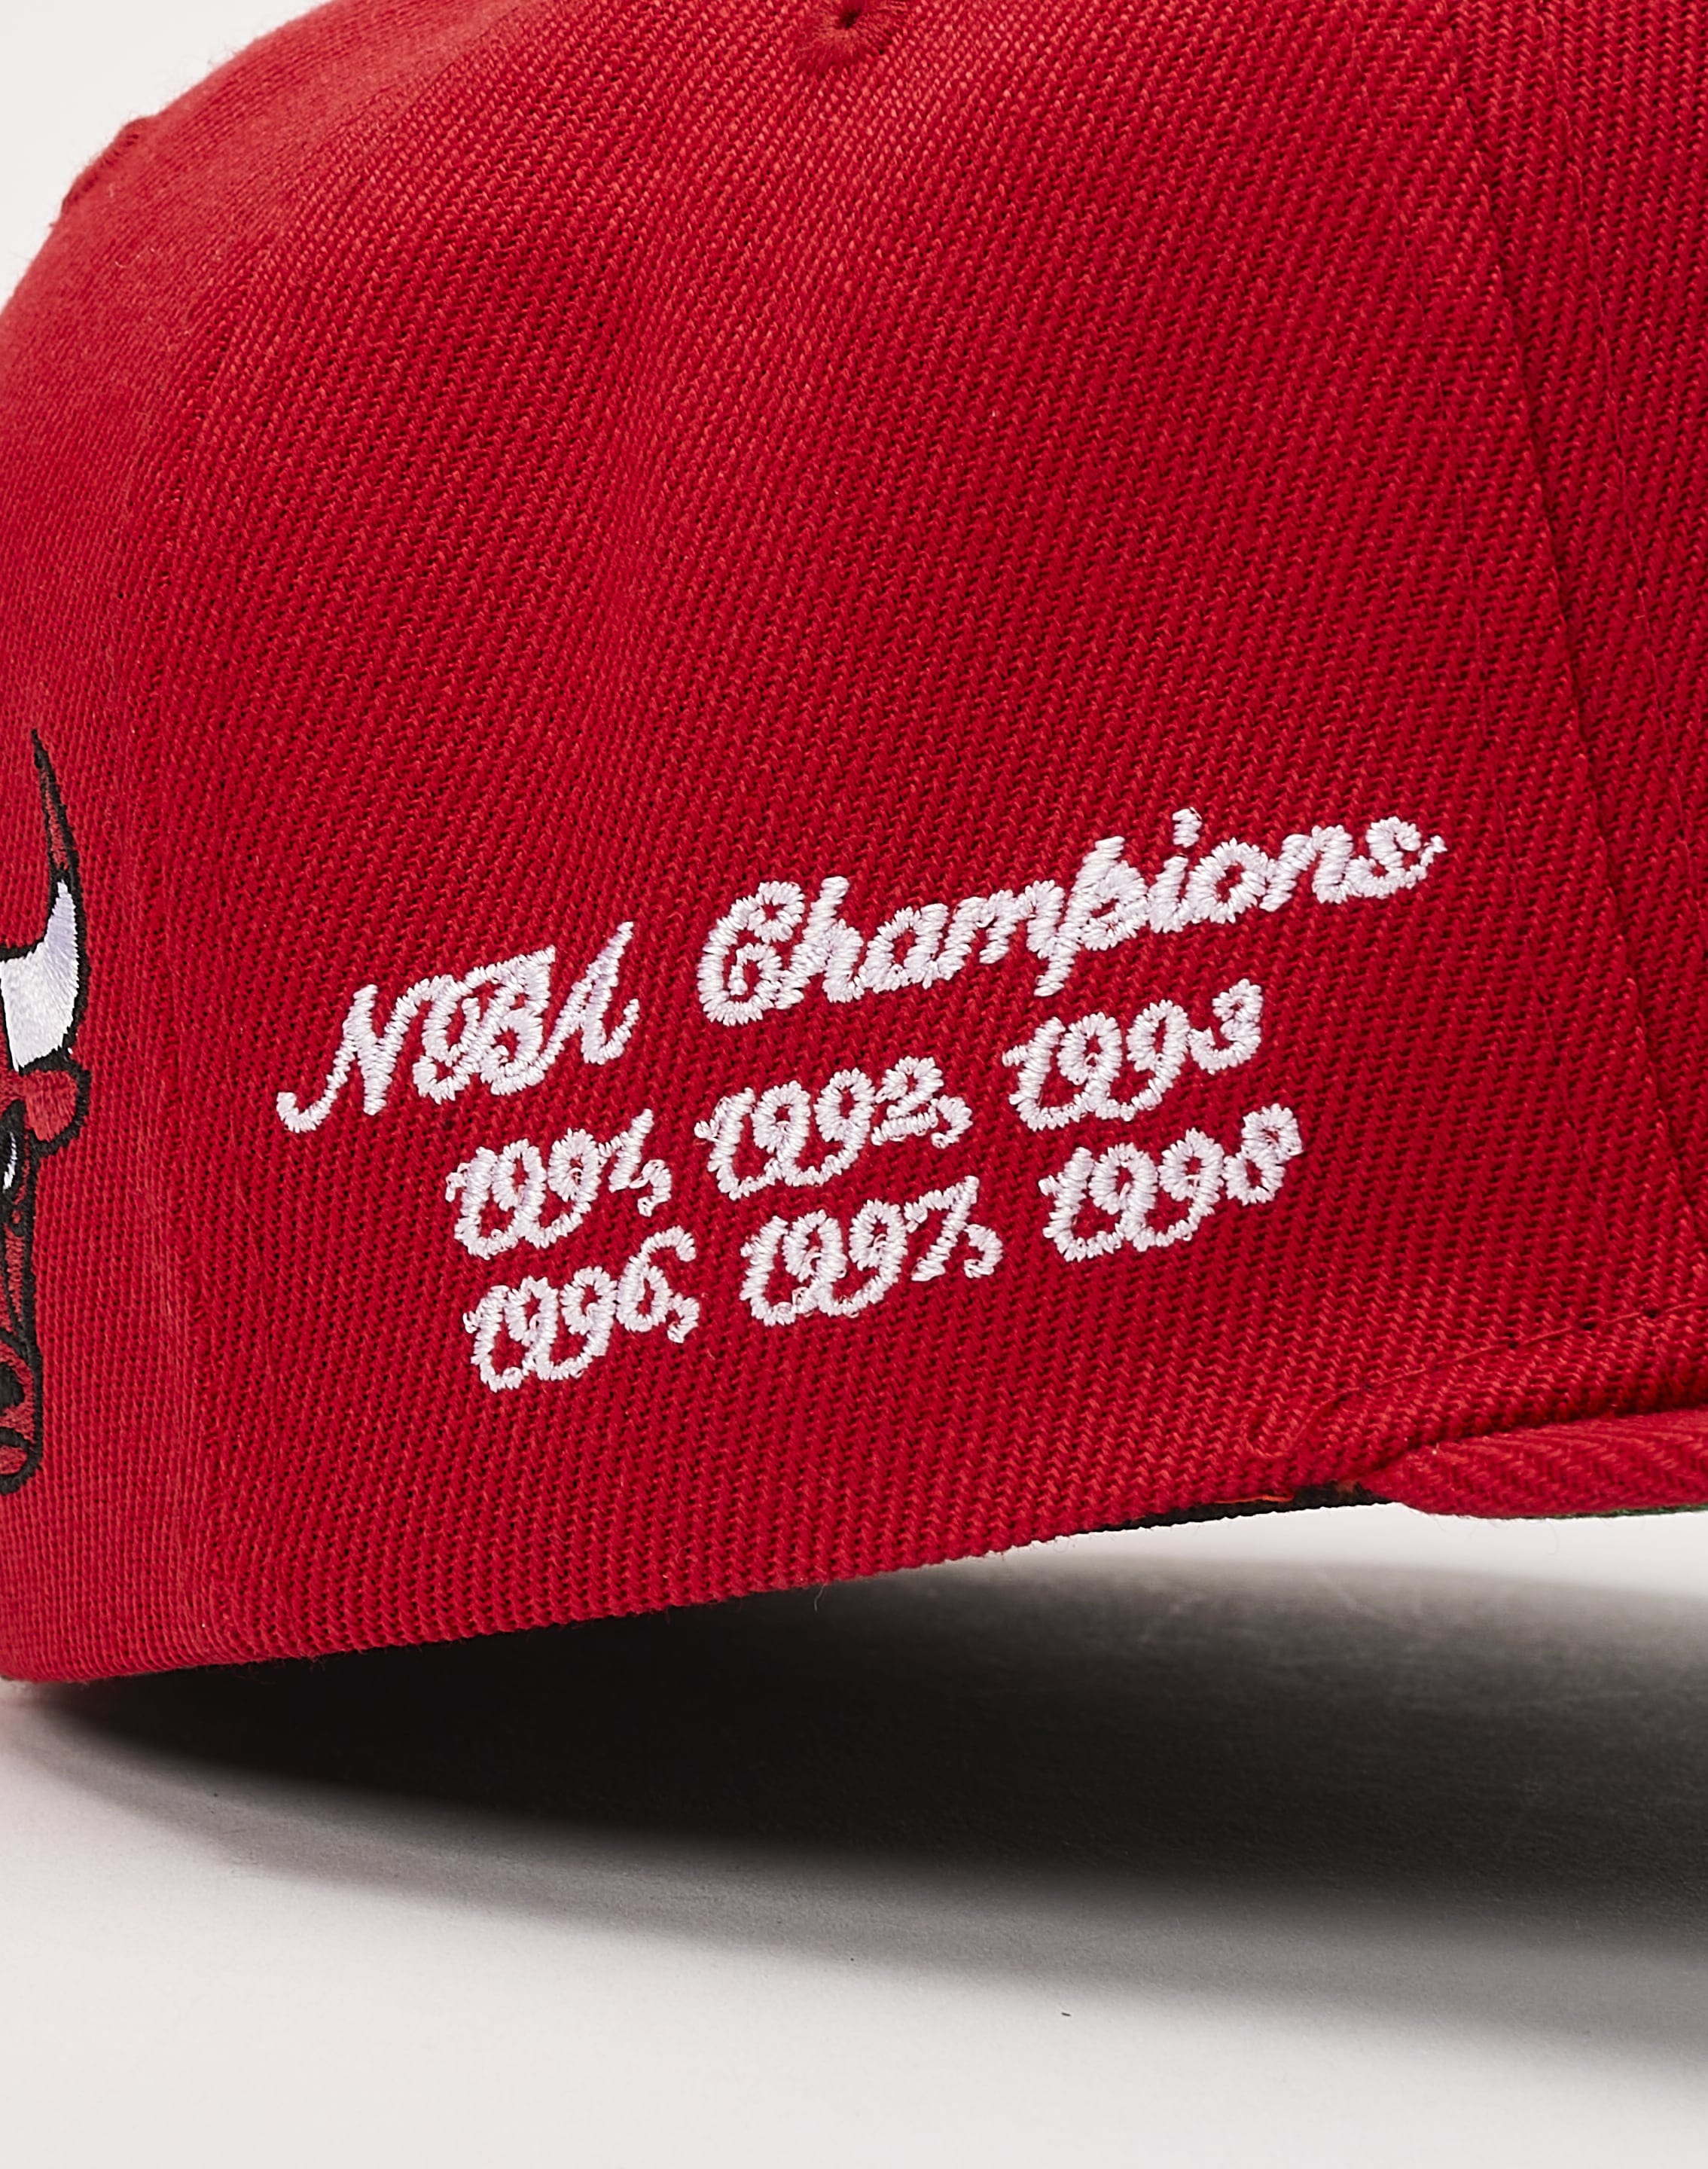 MITCHELL & NESS - Accessories - Chicago Bulls HWC '97 Finals Patch Snapback  - Red/Black